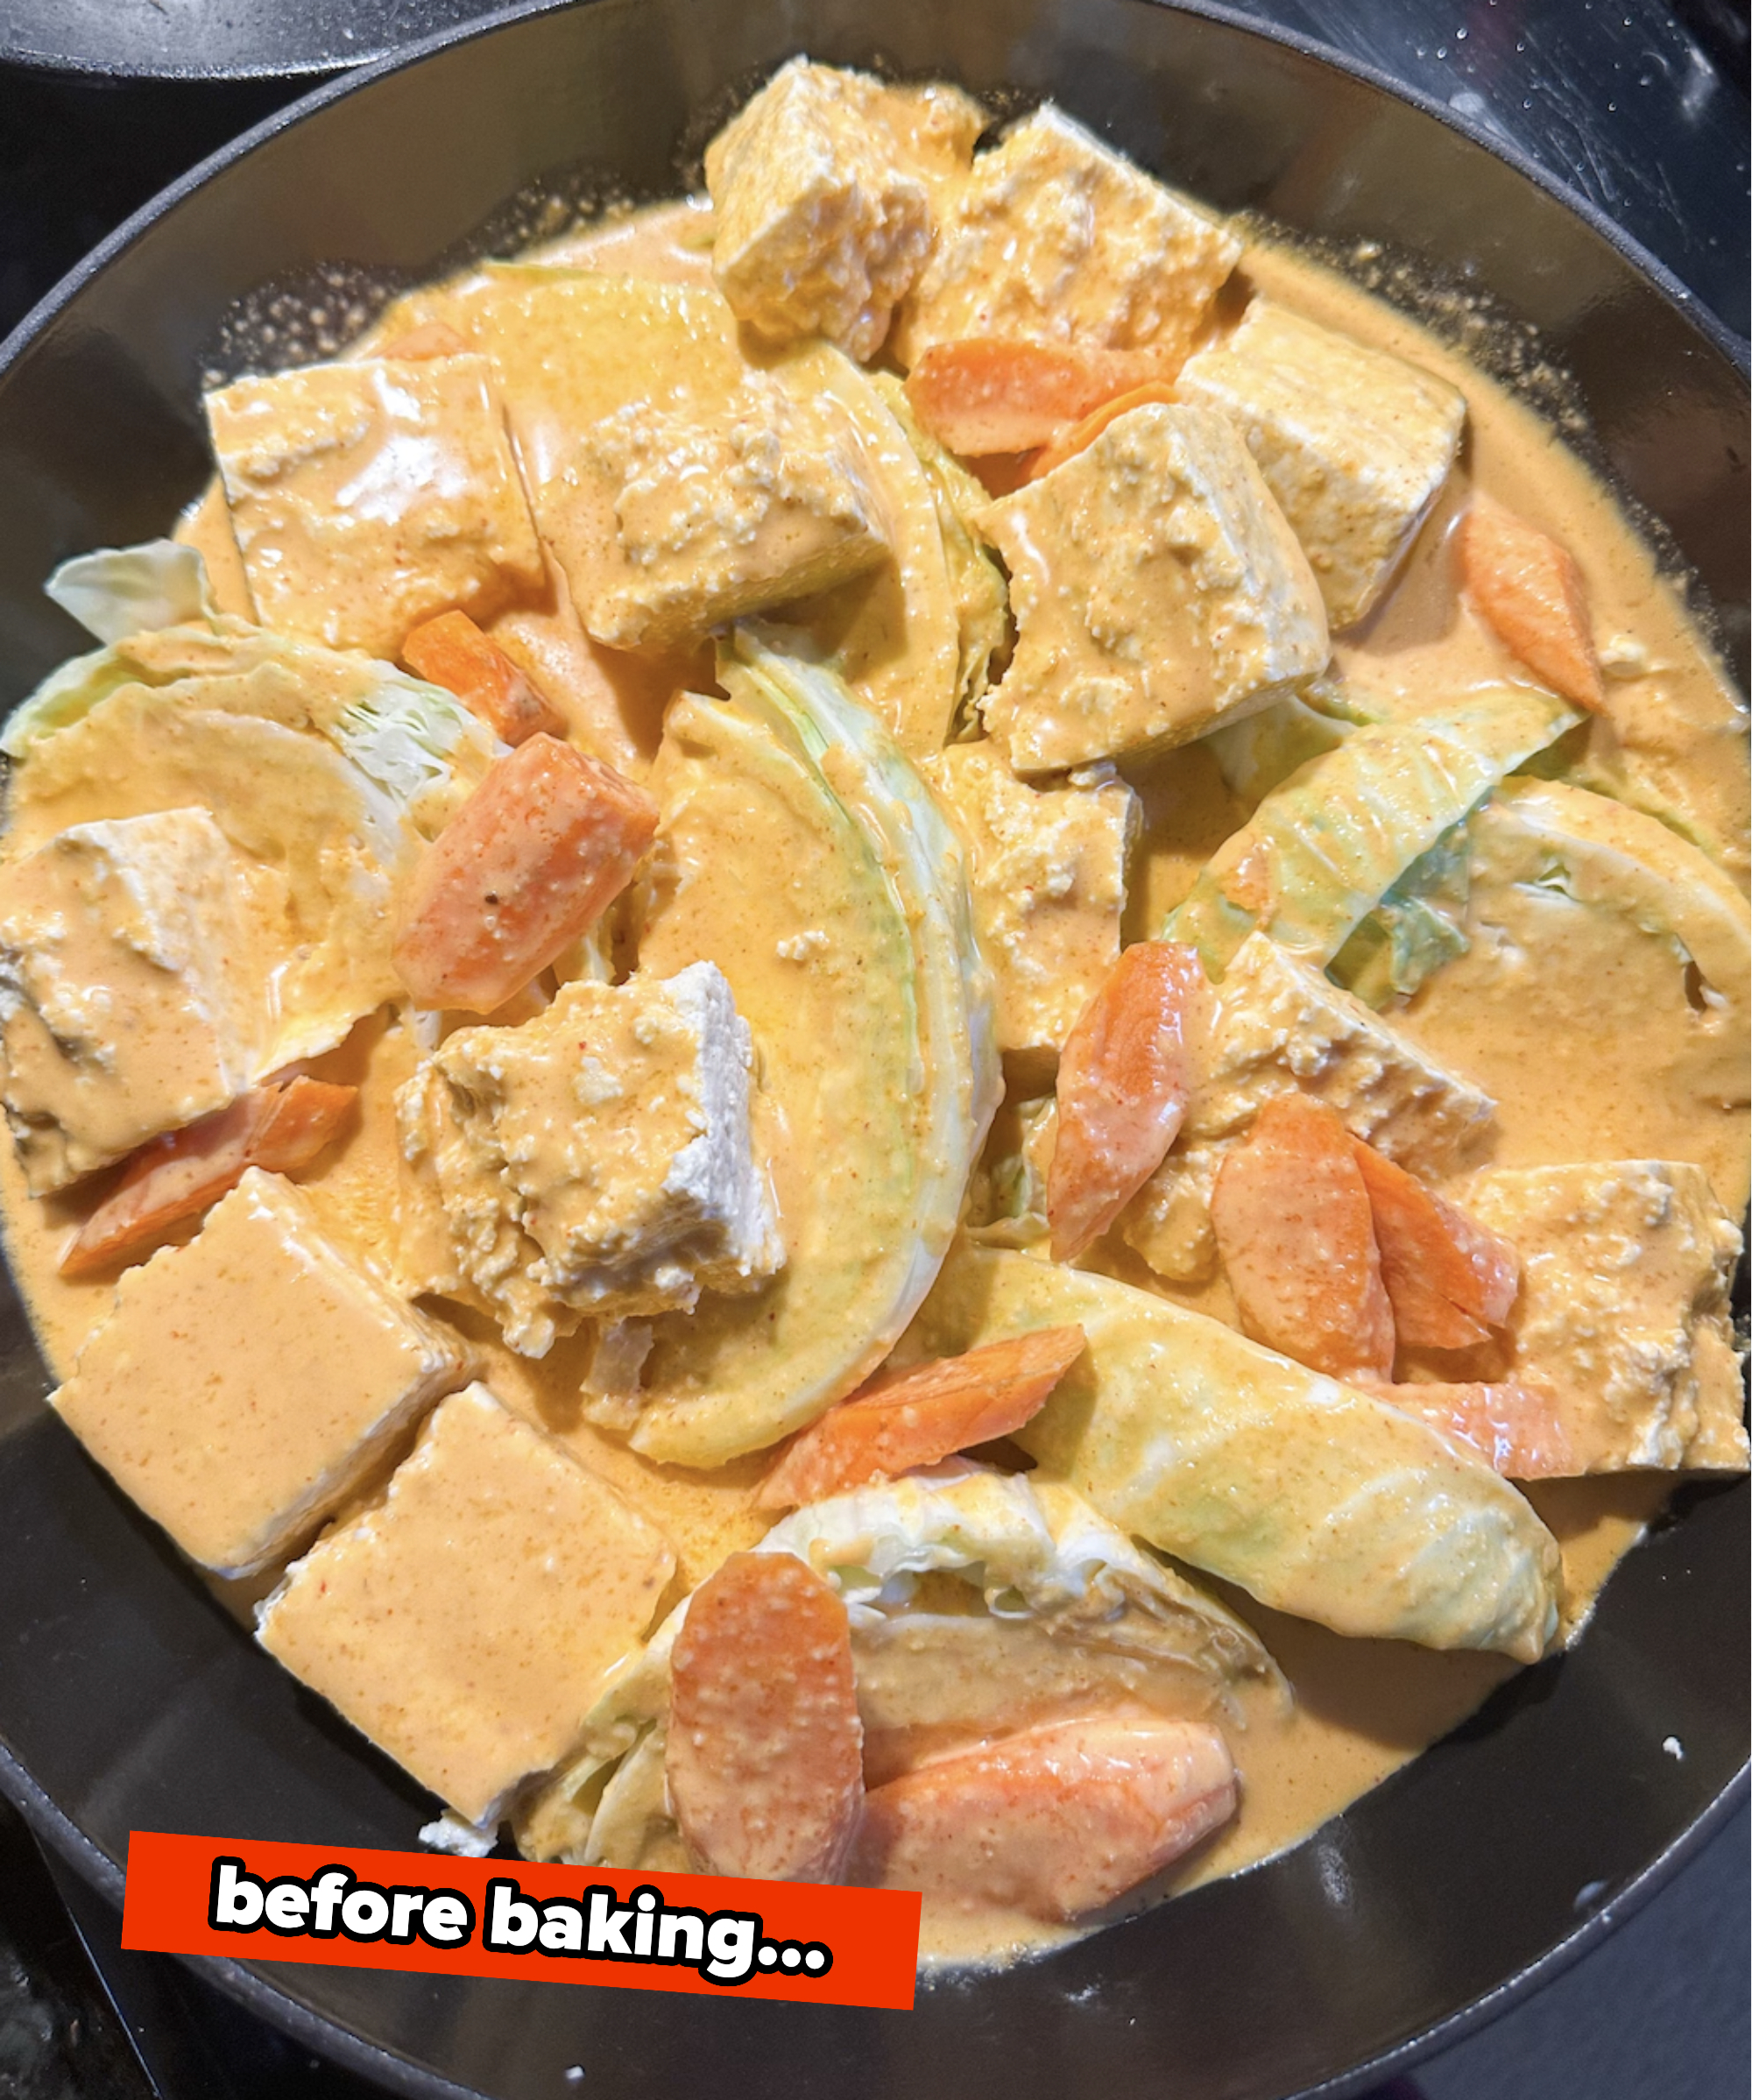 Cabbage tofu and carrots in a curry sauce before baking